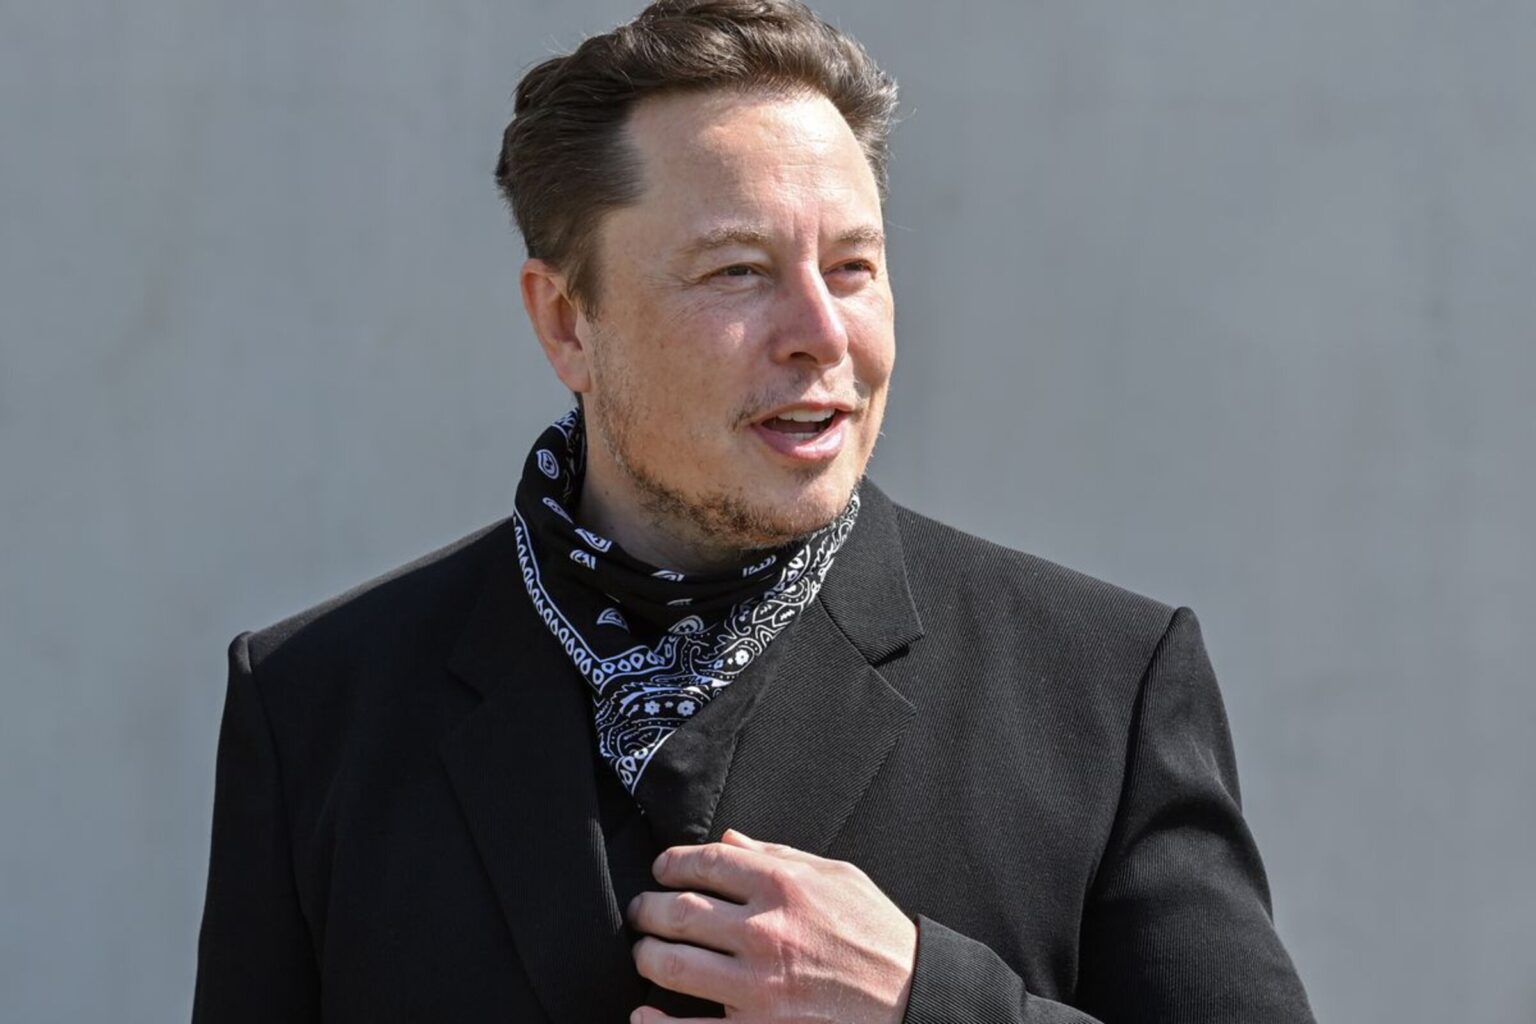 Elon Musk says he will pay more than $11 billion in taxes this year. Naturally, people want know how it will affect his net worth. Get the latest info now!